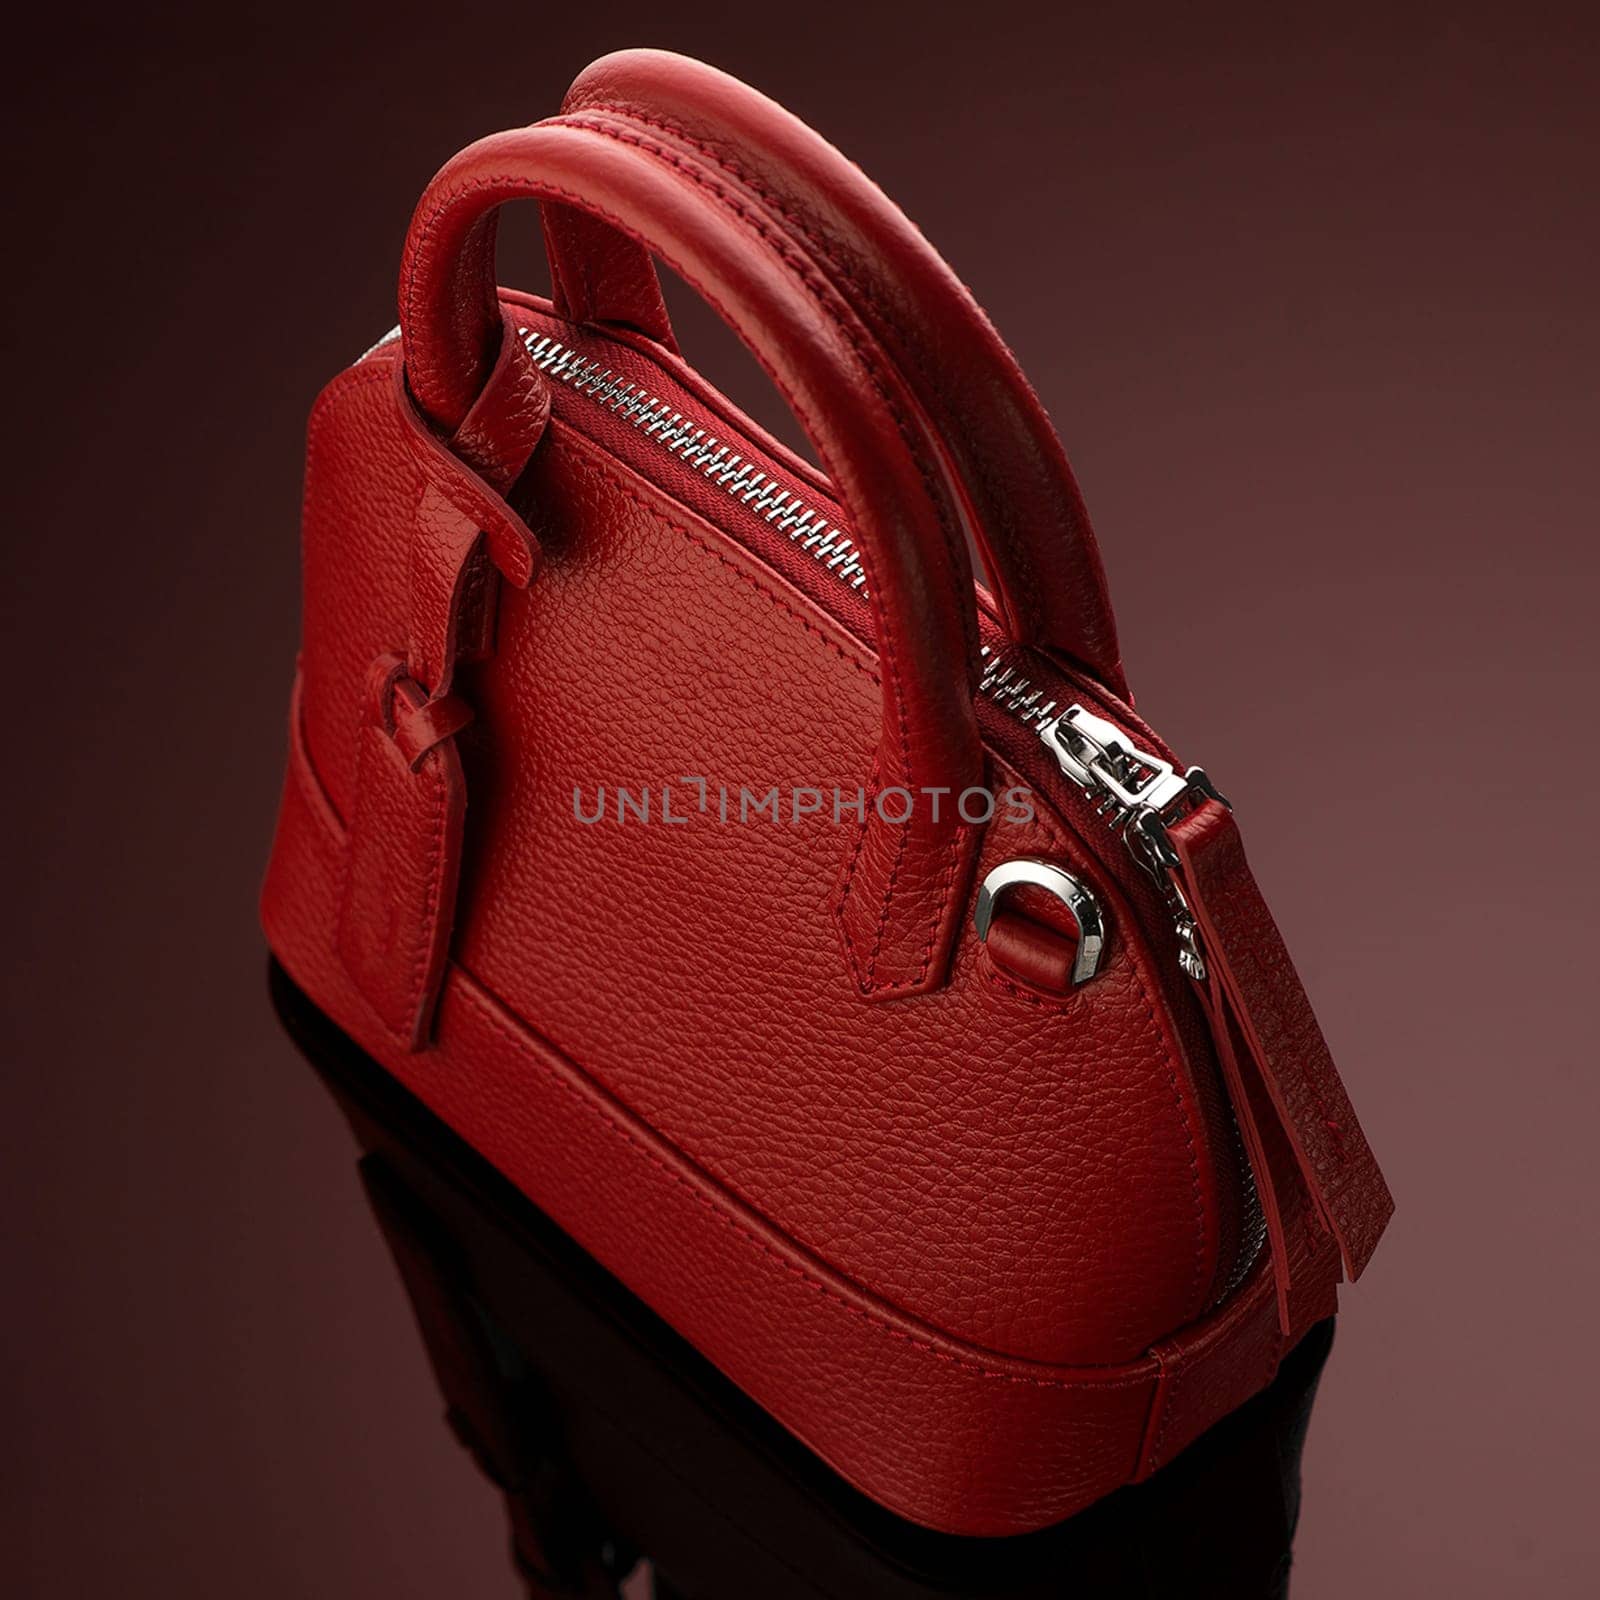 A closeup shot of a luxury red leather bag by A_Karim